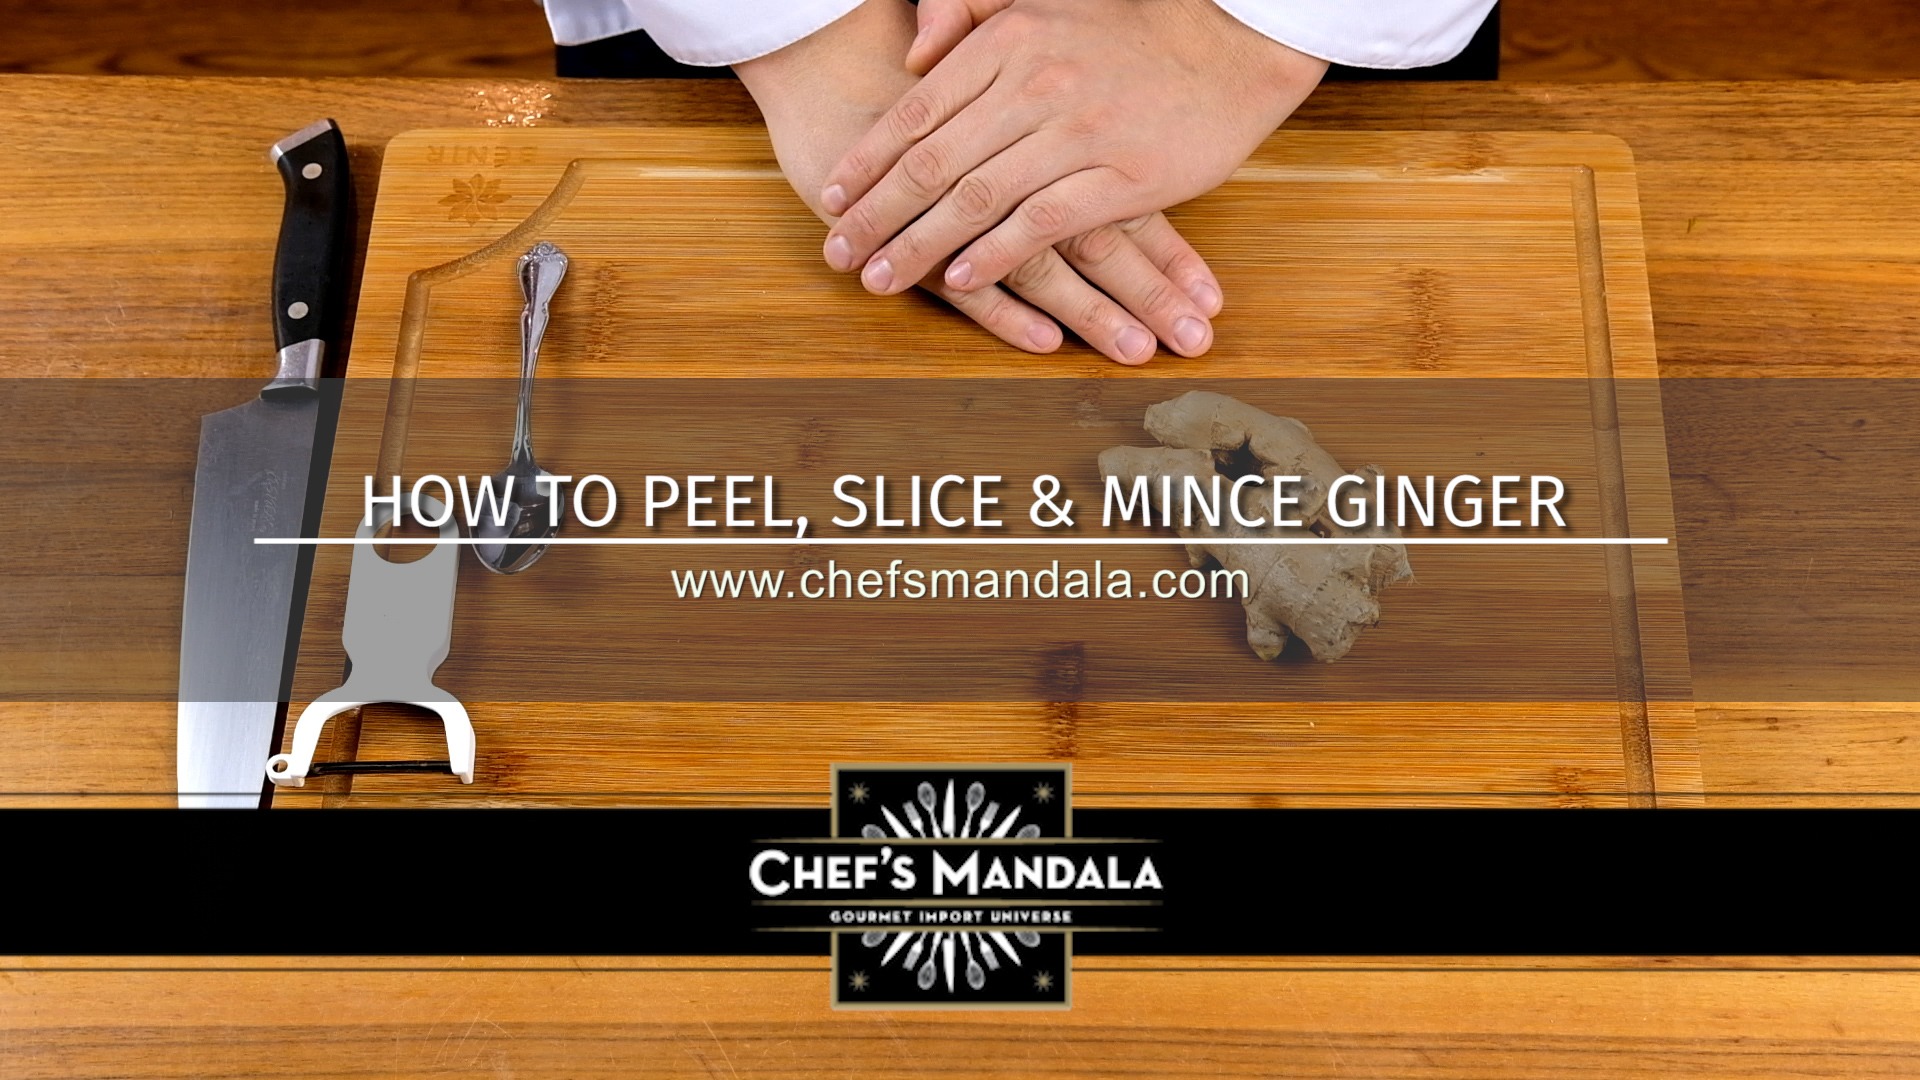 HOW TO PEEL, SLICE & MINCE GINGER